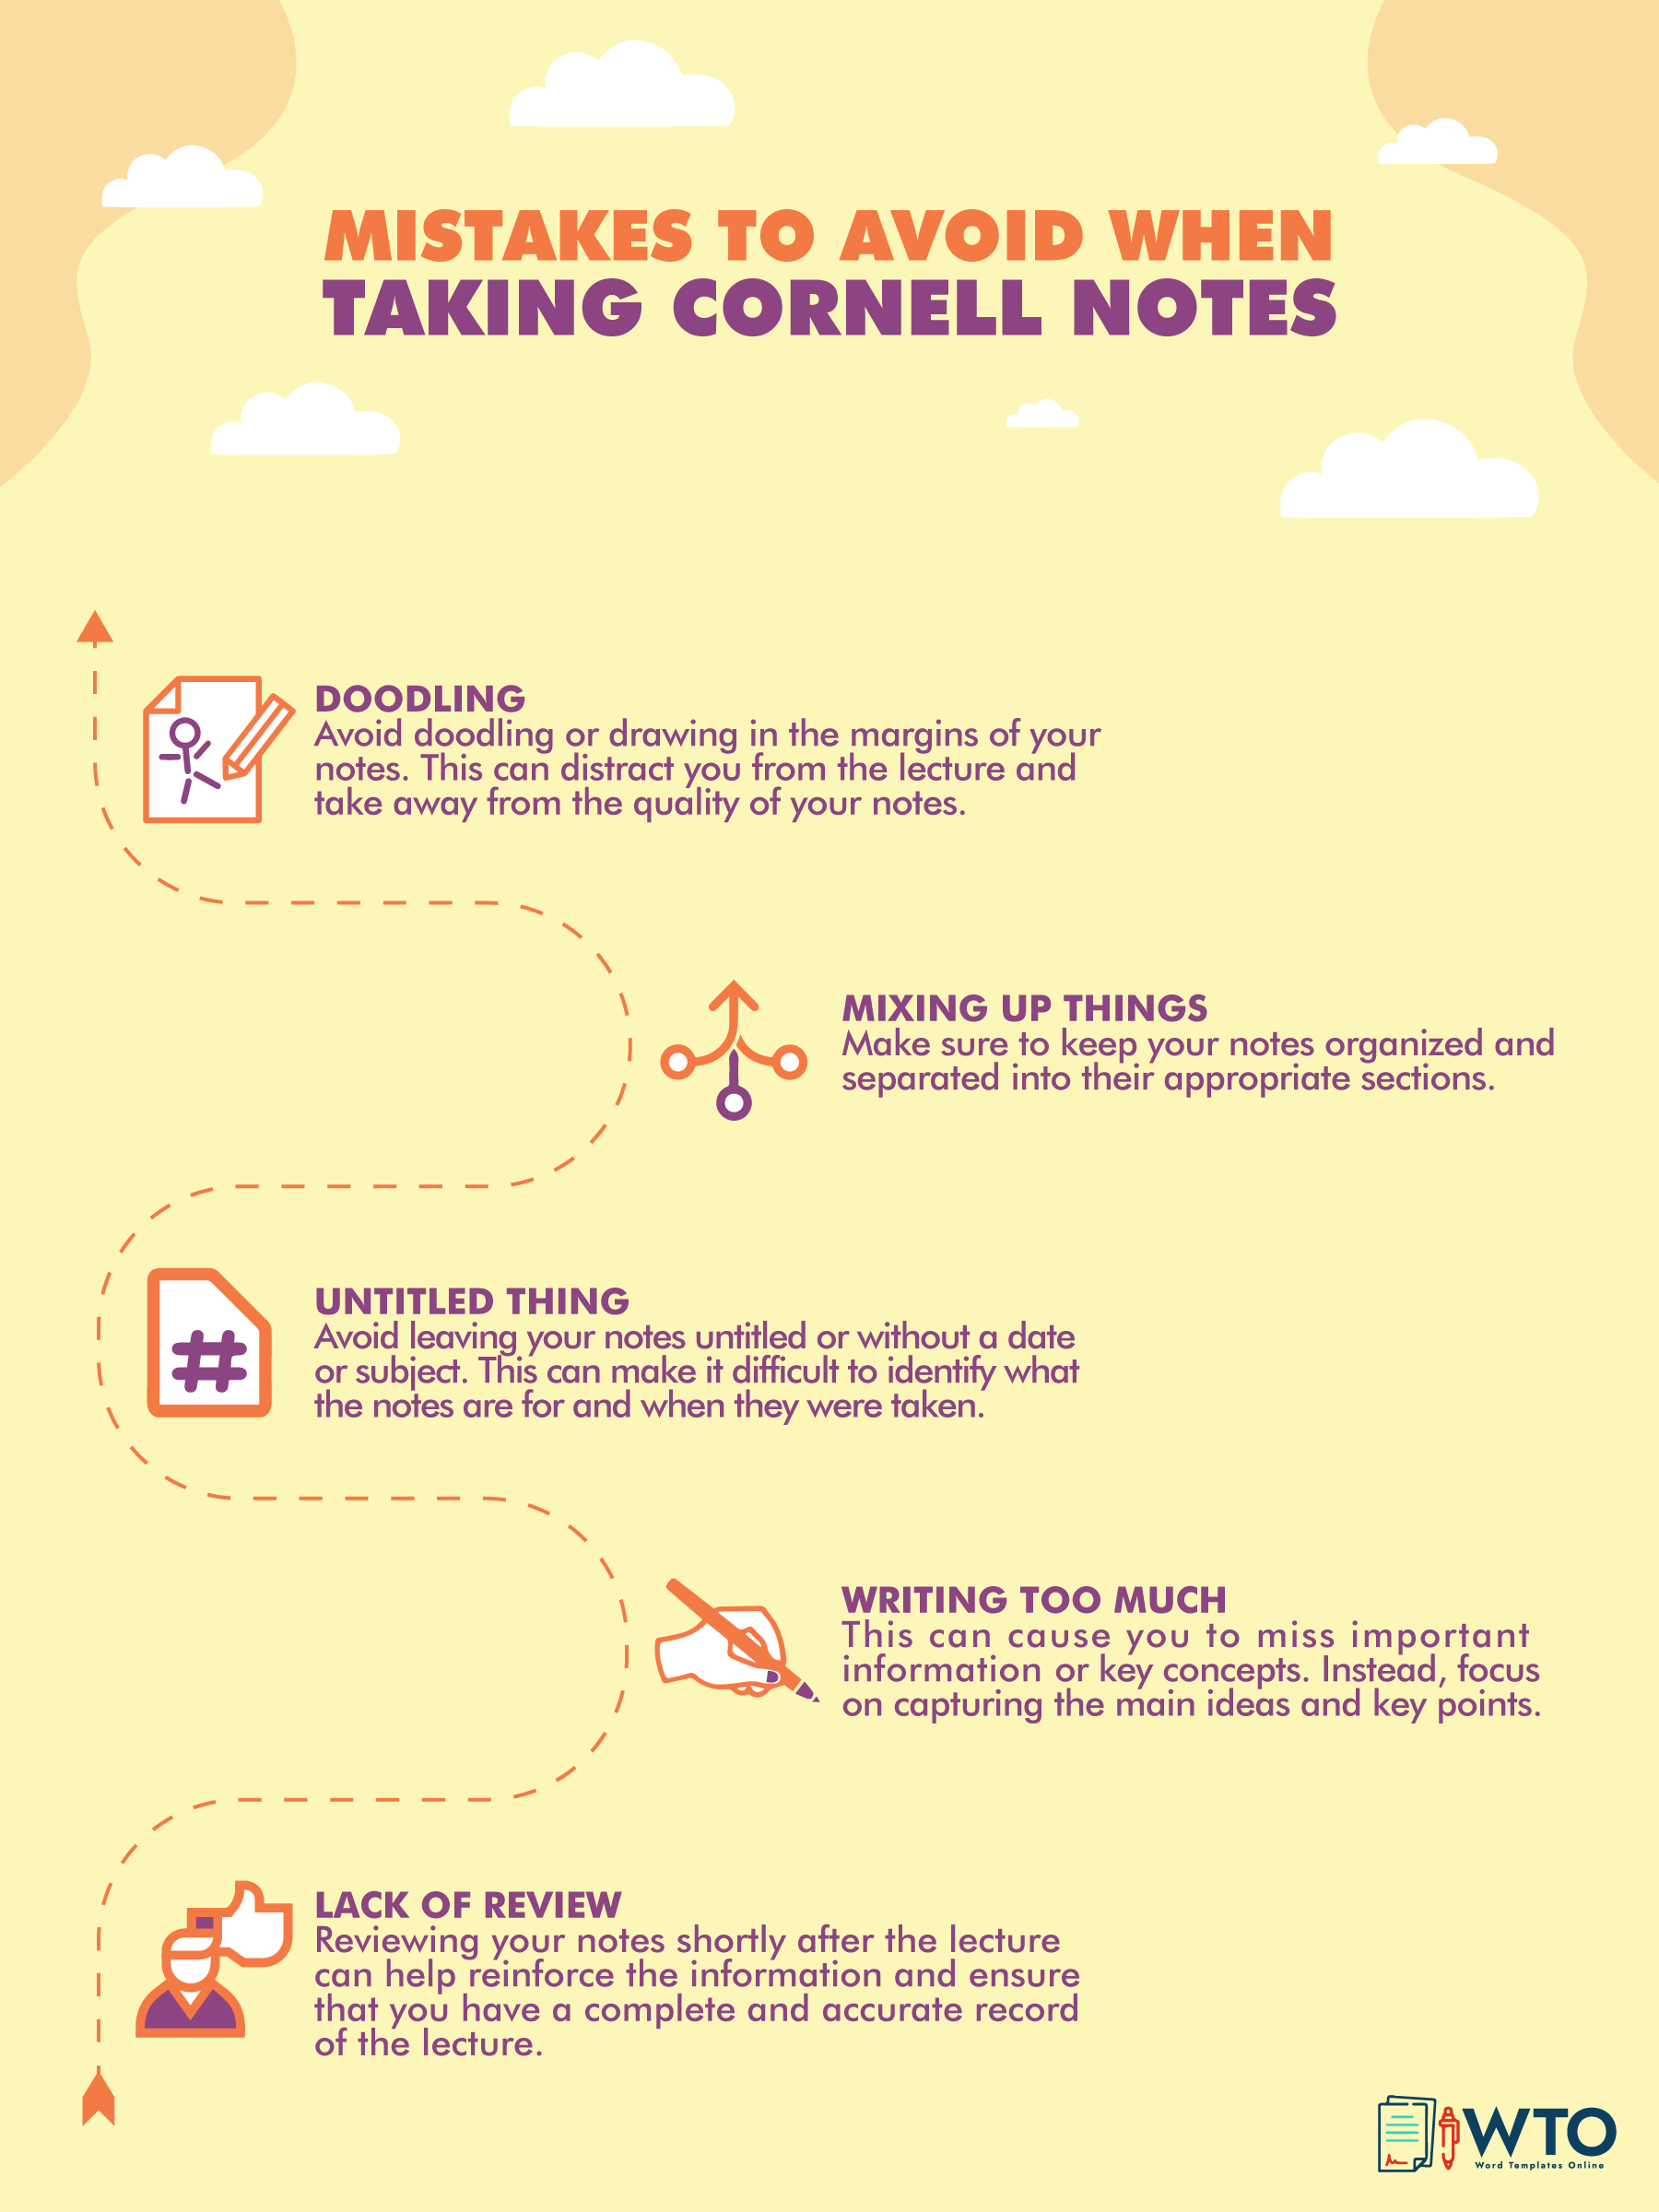 This infographic is about the mistakes to avoid while taking Cornell Notes.